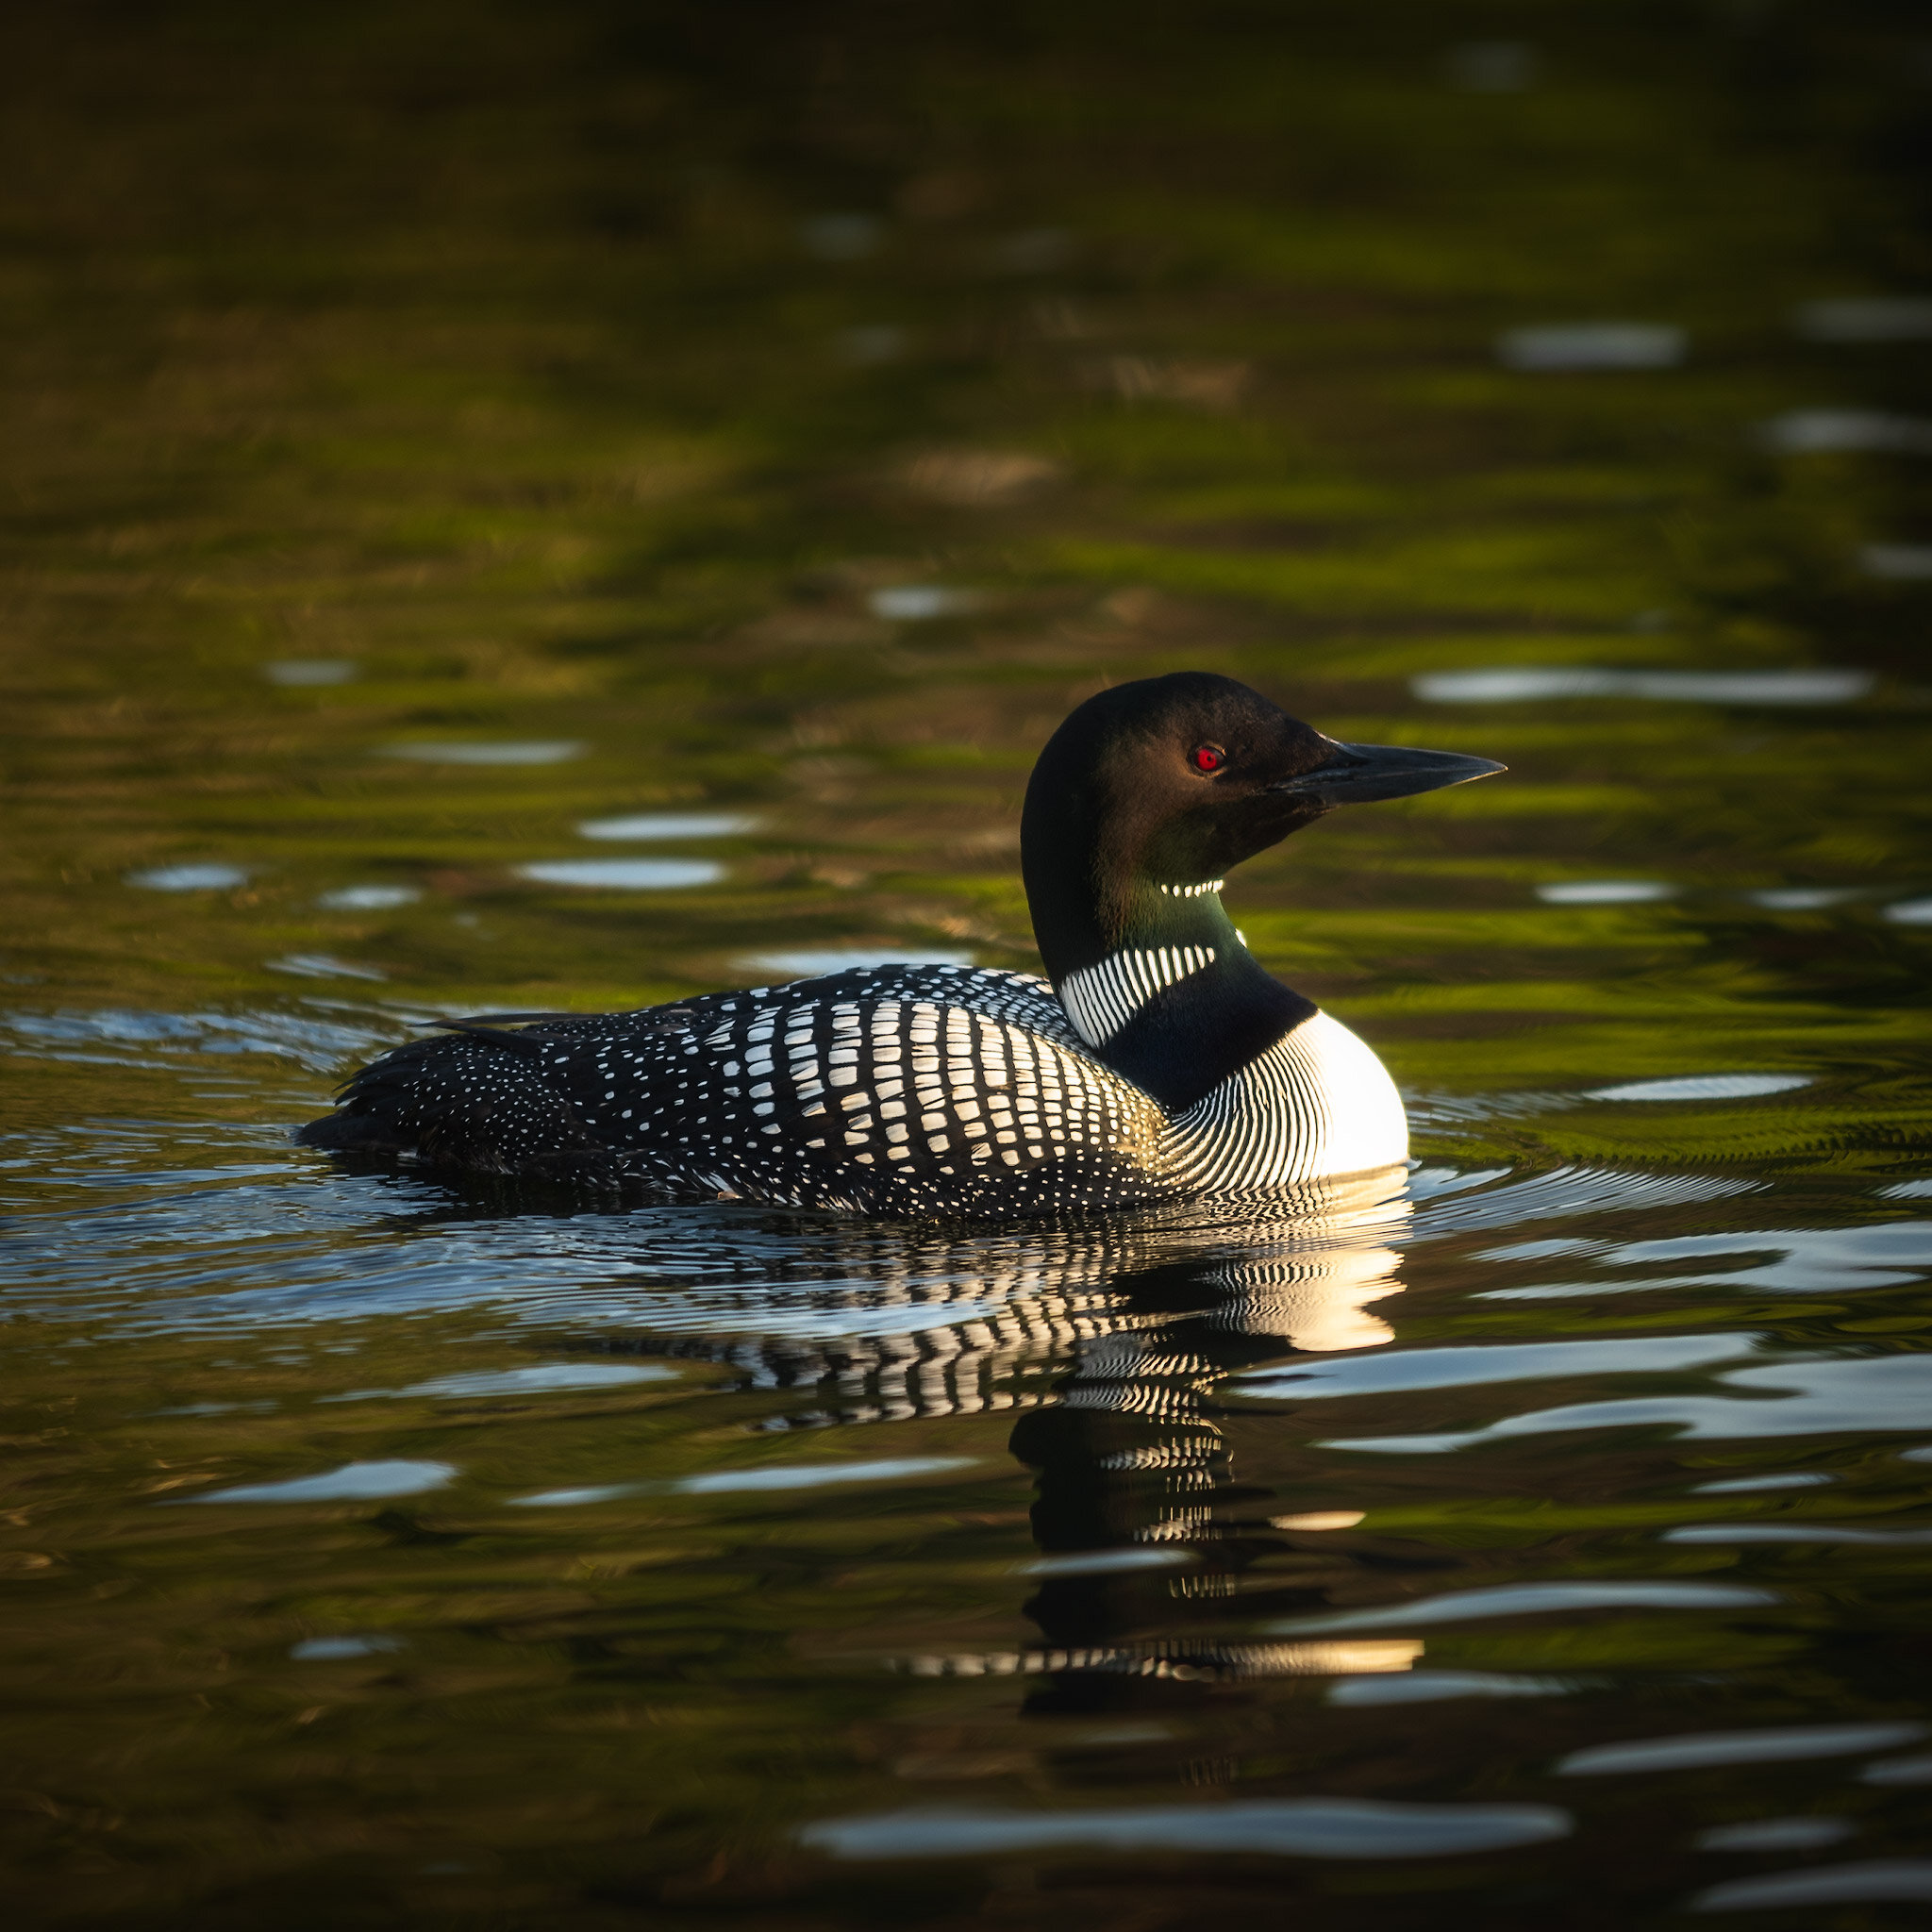 A Loon photographed later in the trip.